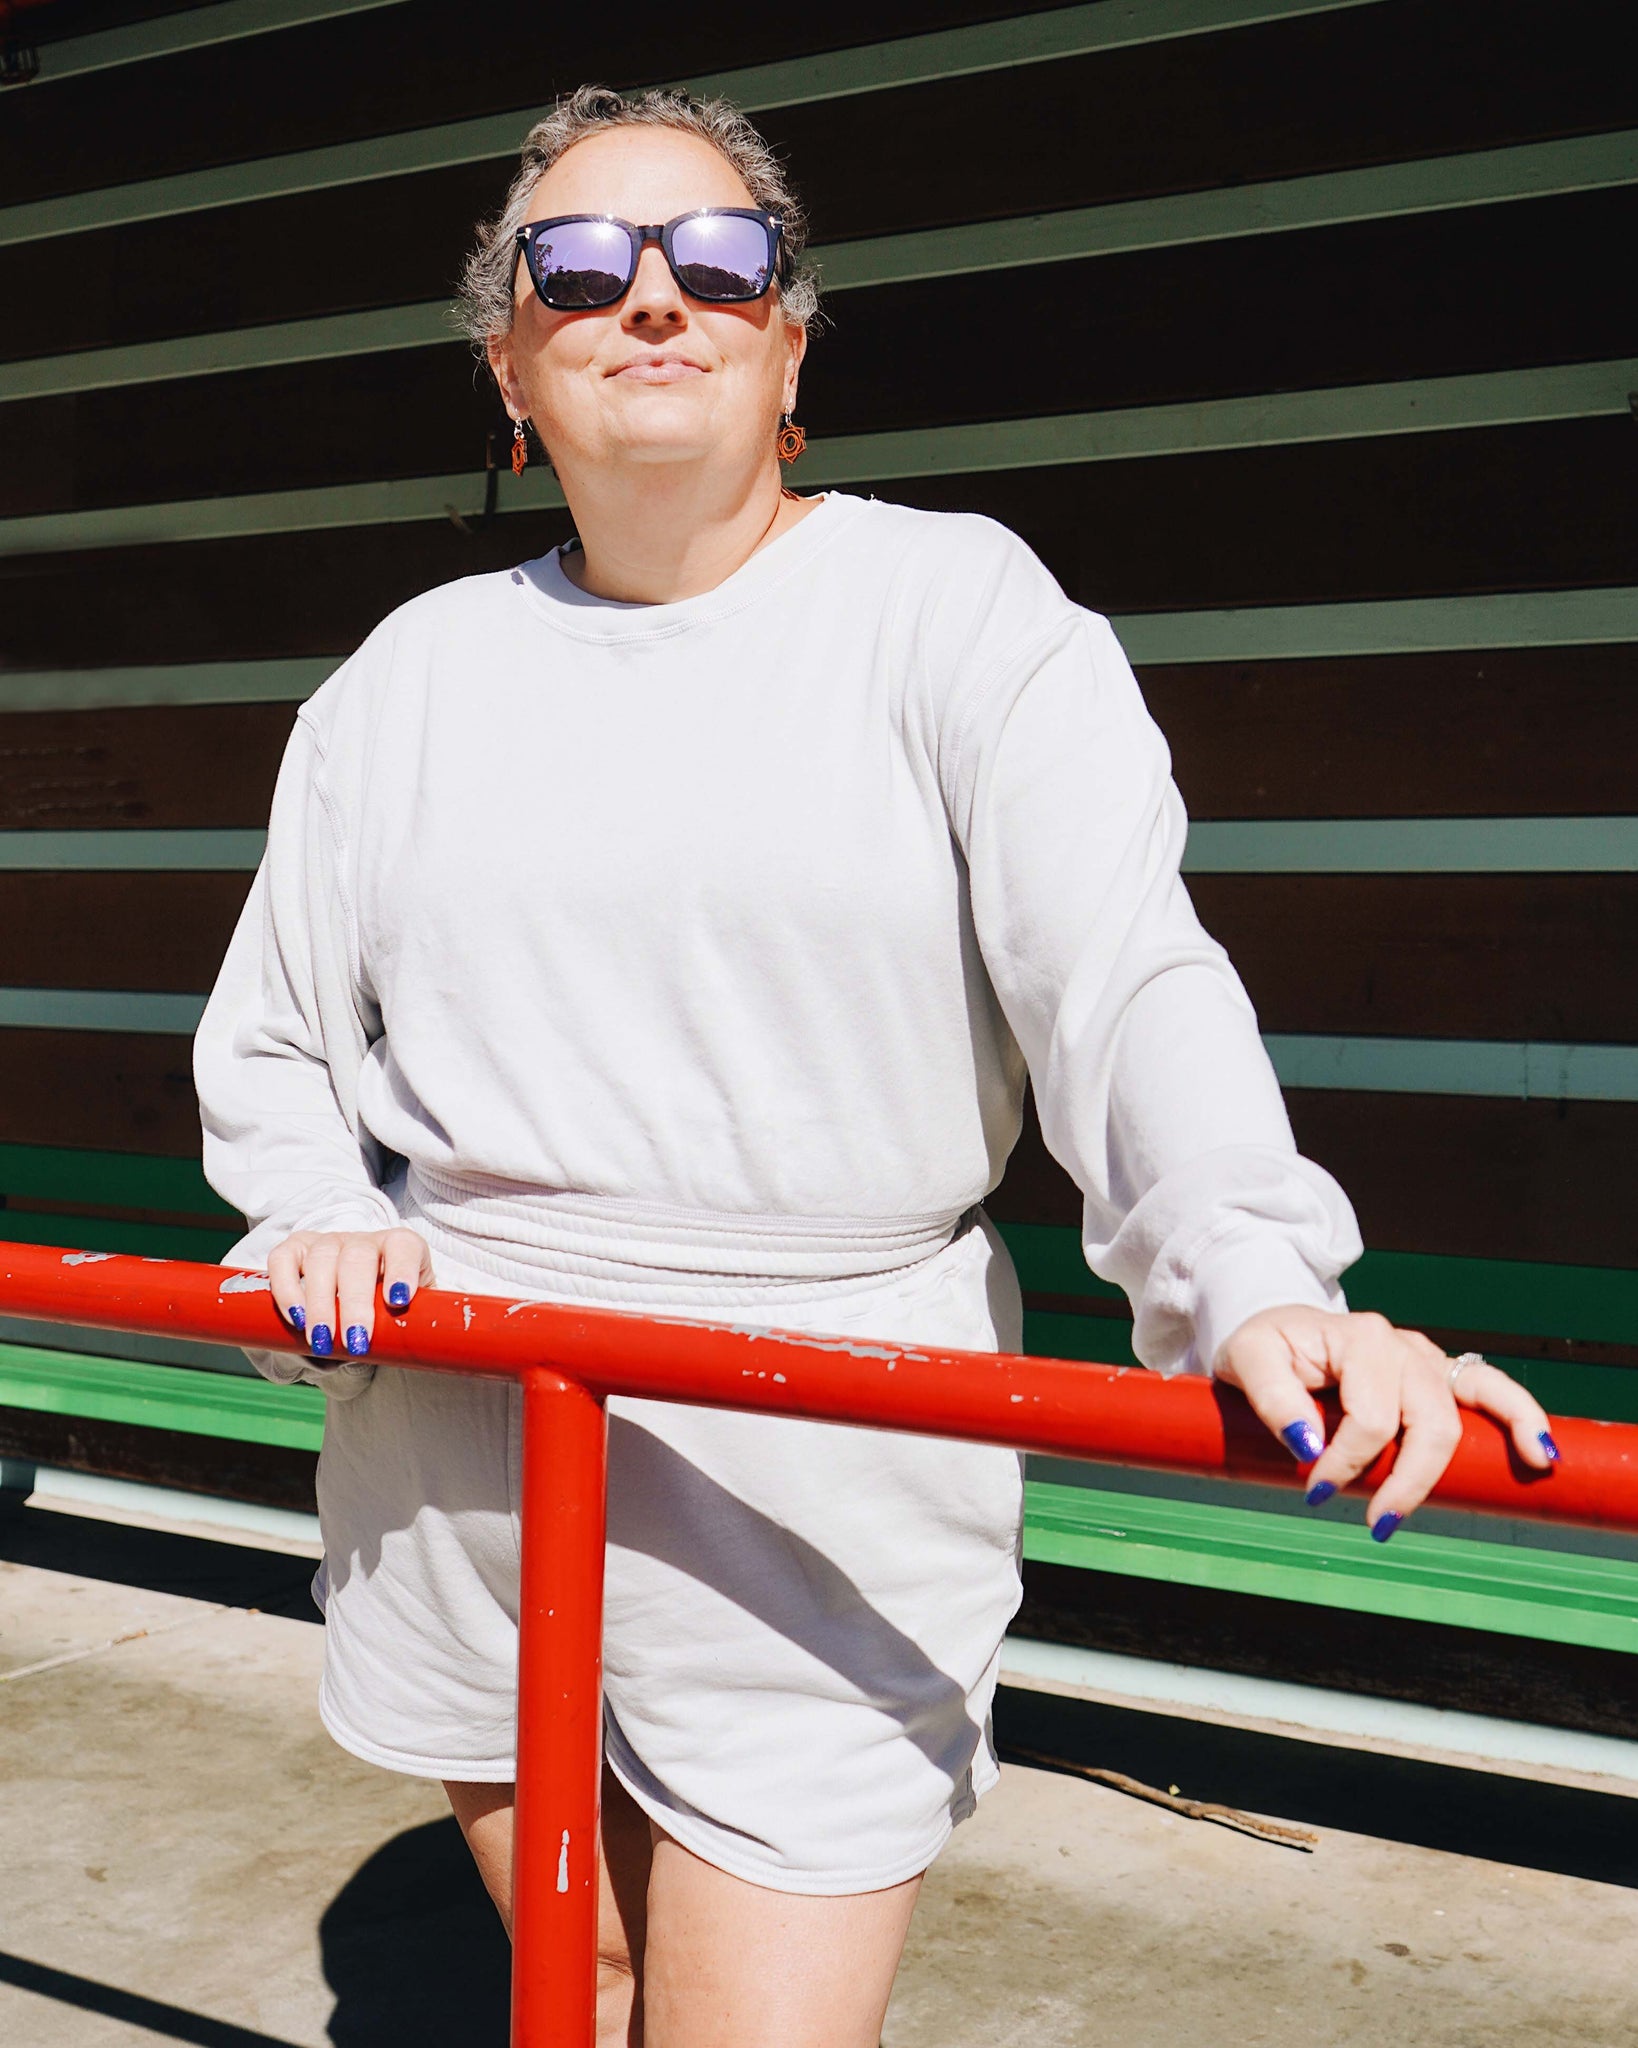 Heidi, a middle-aged Caucasian woman wearing sunglasses and wearing the Fog Grey Sweatshorts along with Cropped Sweatshirt with hands on red metal fencing with green metal horizontal panel in background.